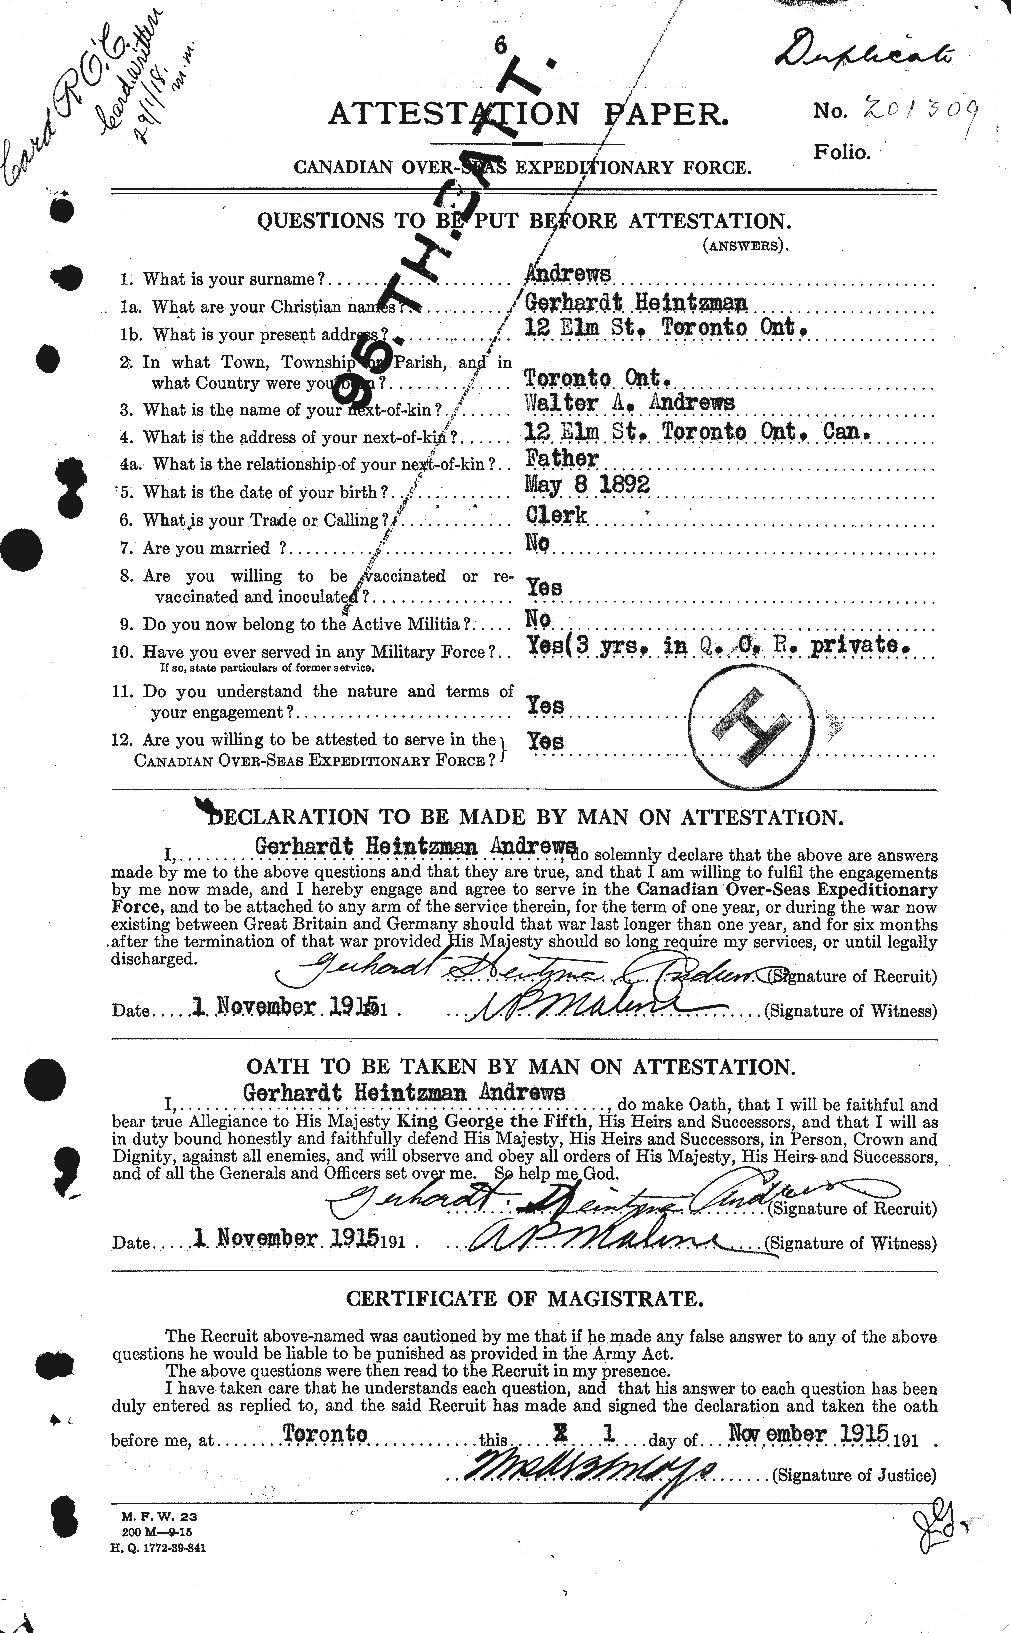 Personnel Records of the First World War - CEF 210307a